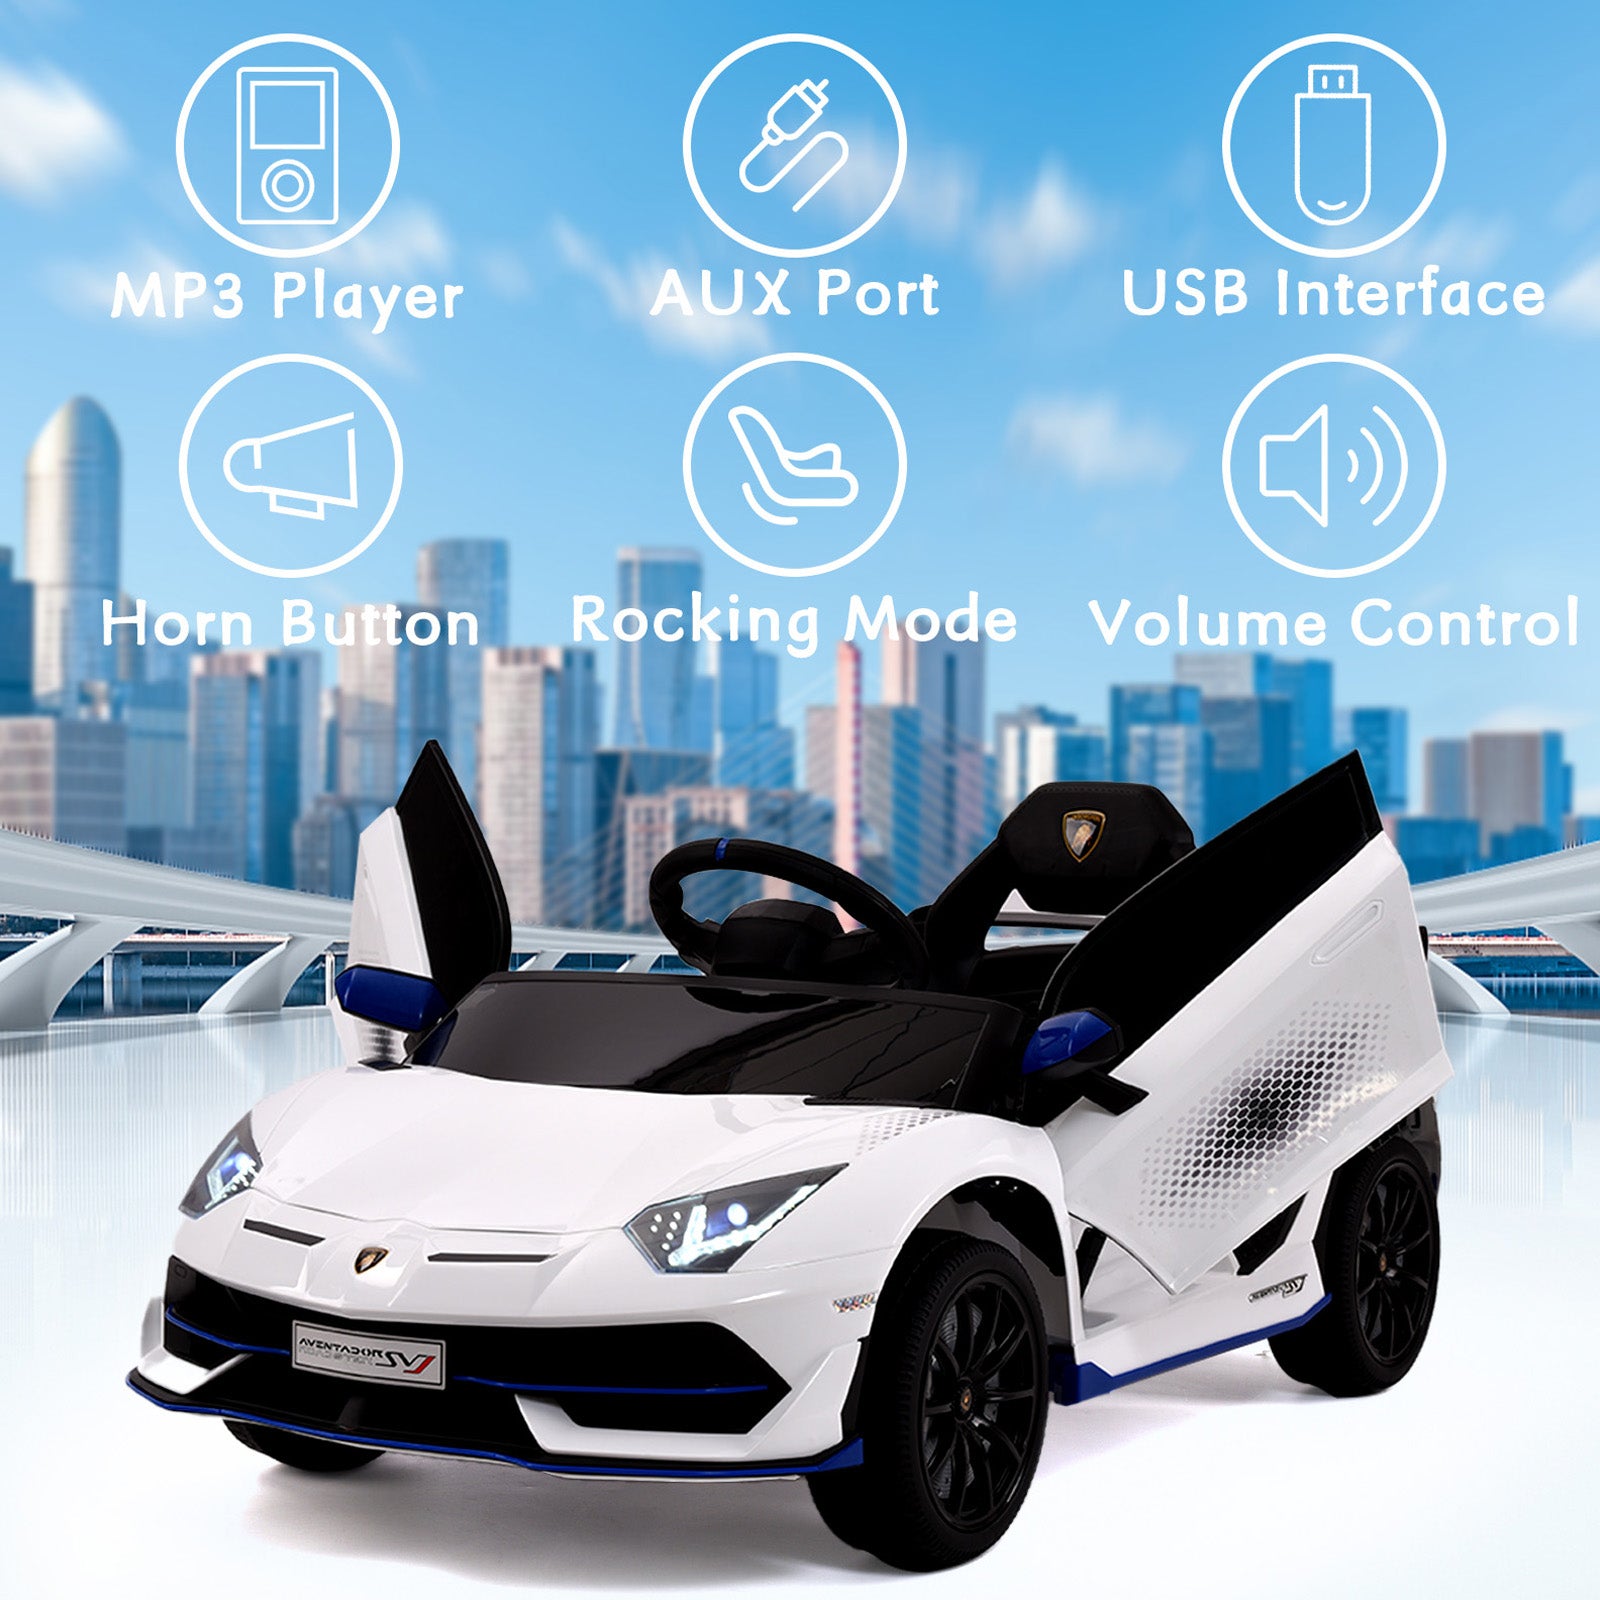 XJD 12V Kids Ride On Lamborghini Electric Car Power Wheels Battery Operated Vehicles Speeds Adjustable with Music, Parent Remote Control, Spring Suspension, White